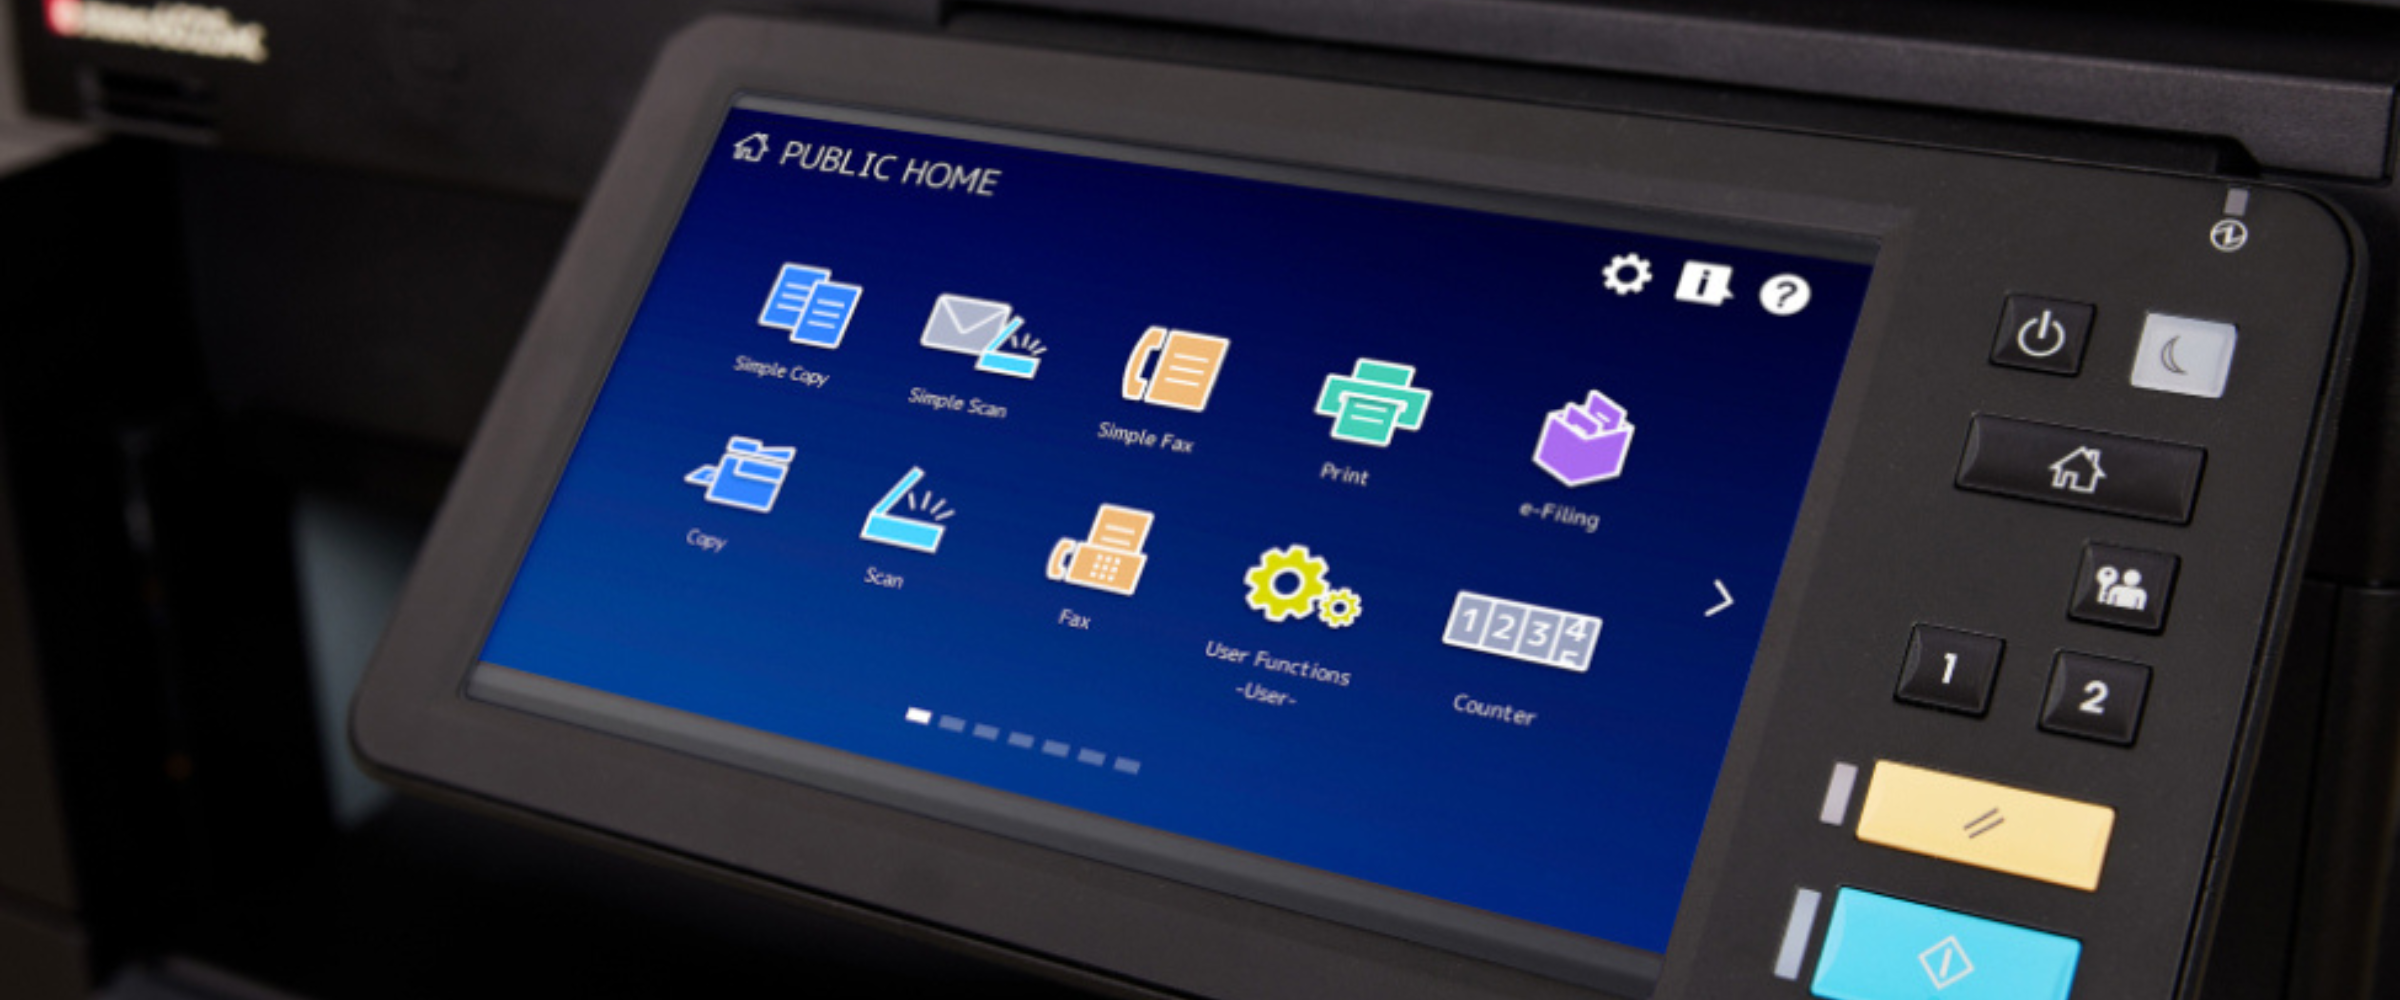 Toshiba MFP interface with icons